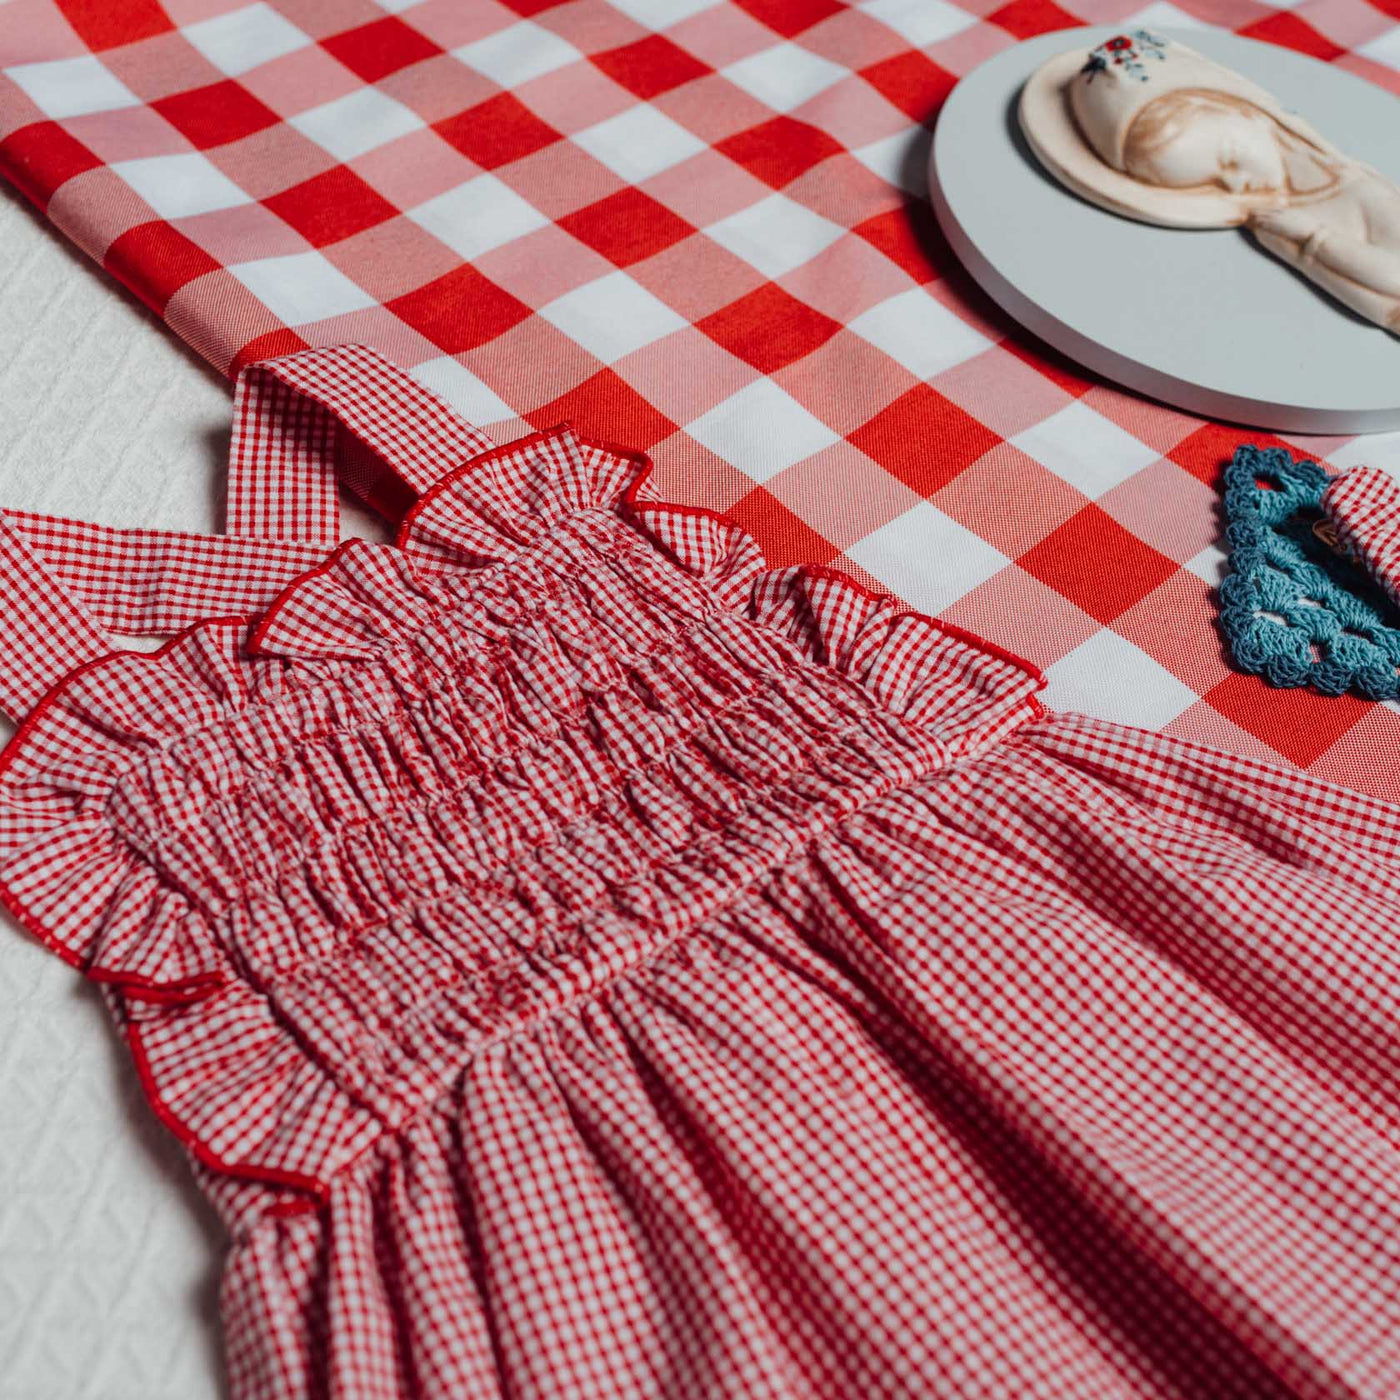 Red Gingham Overall Dress by Birinit Petit - Petite Belle